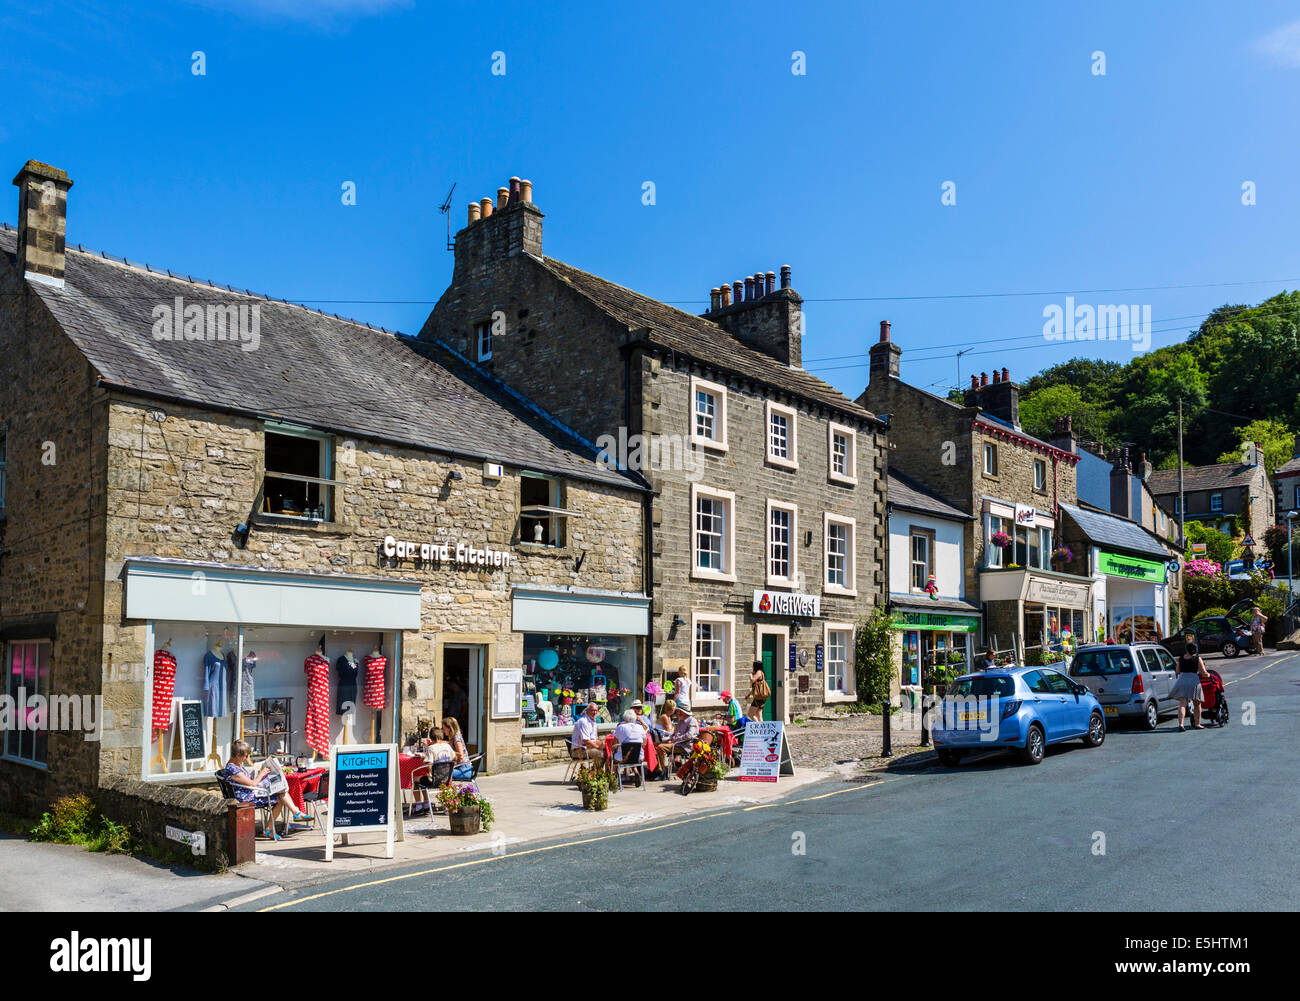 Shops and cafe in the Market Place in the centre of the small town of Settle, North Yorkshire, UK Stock Photo